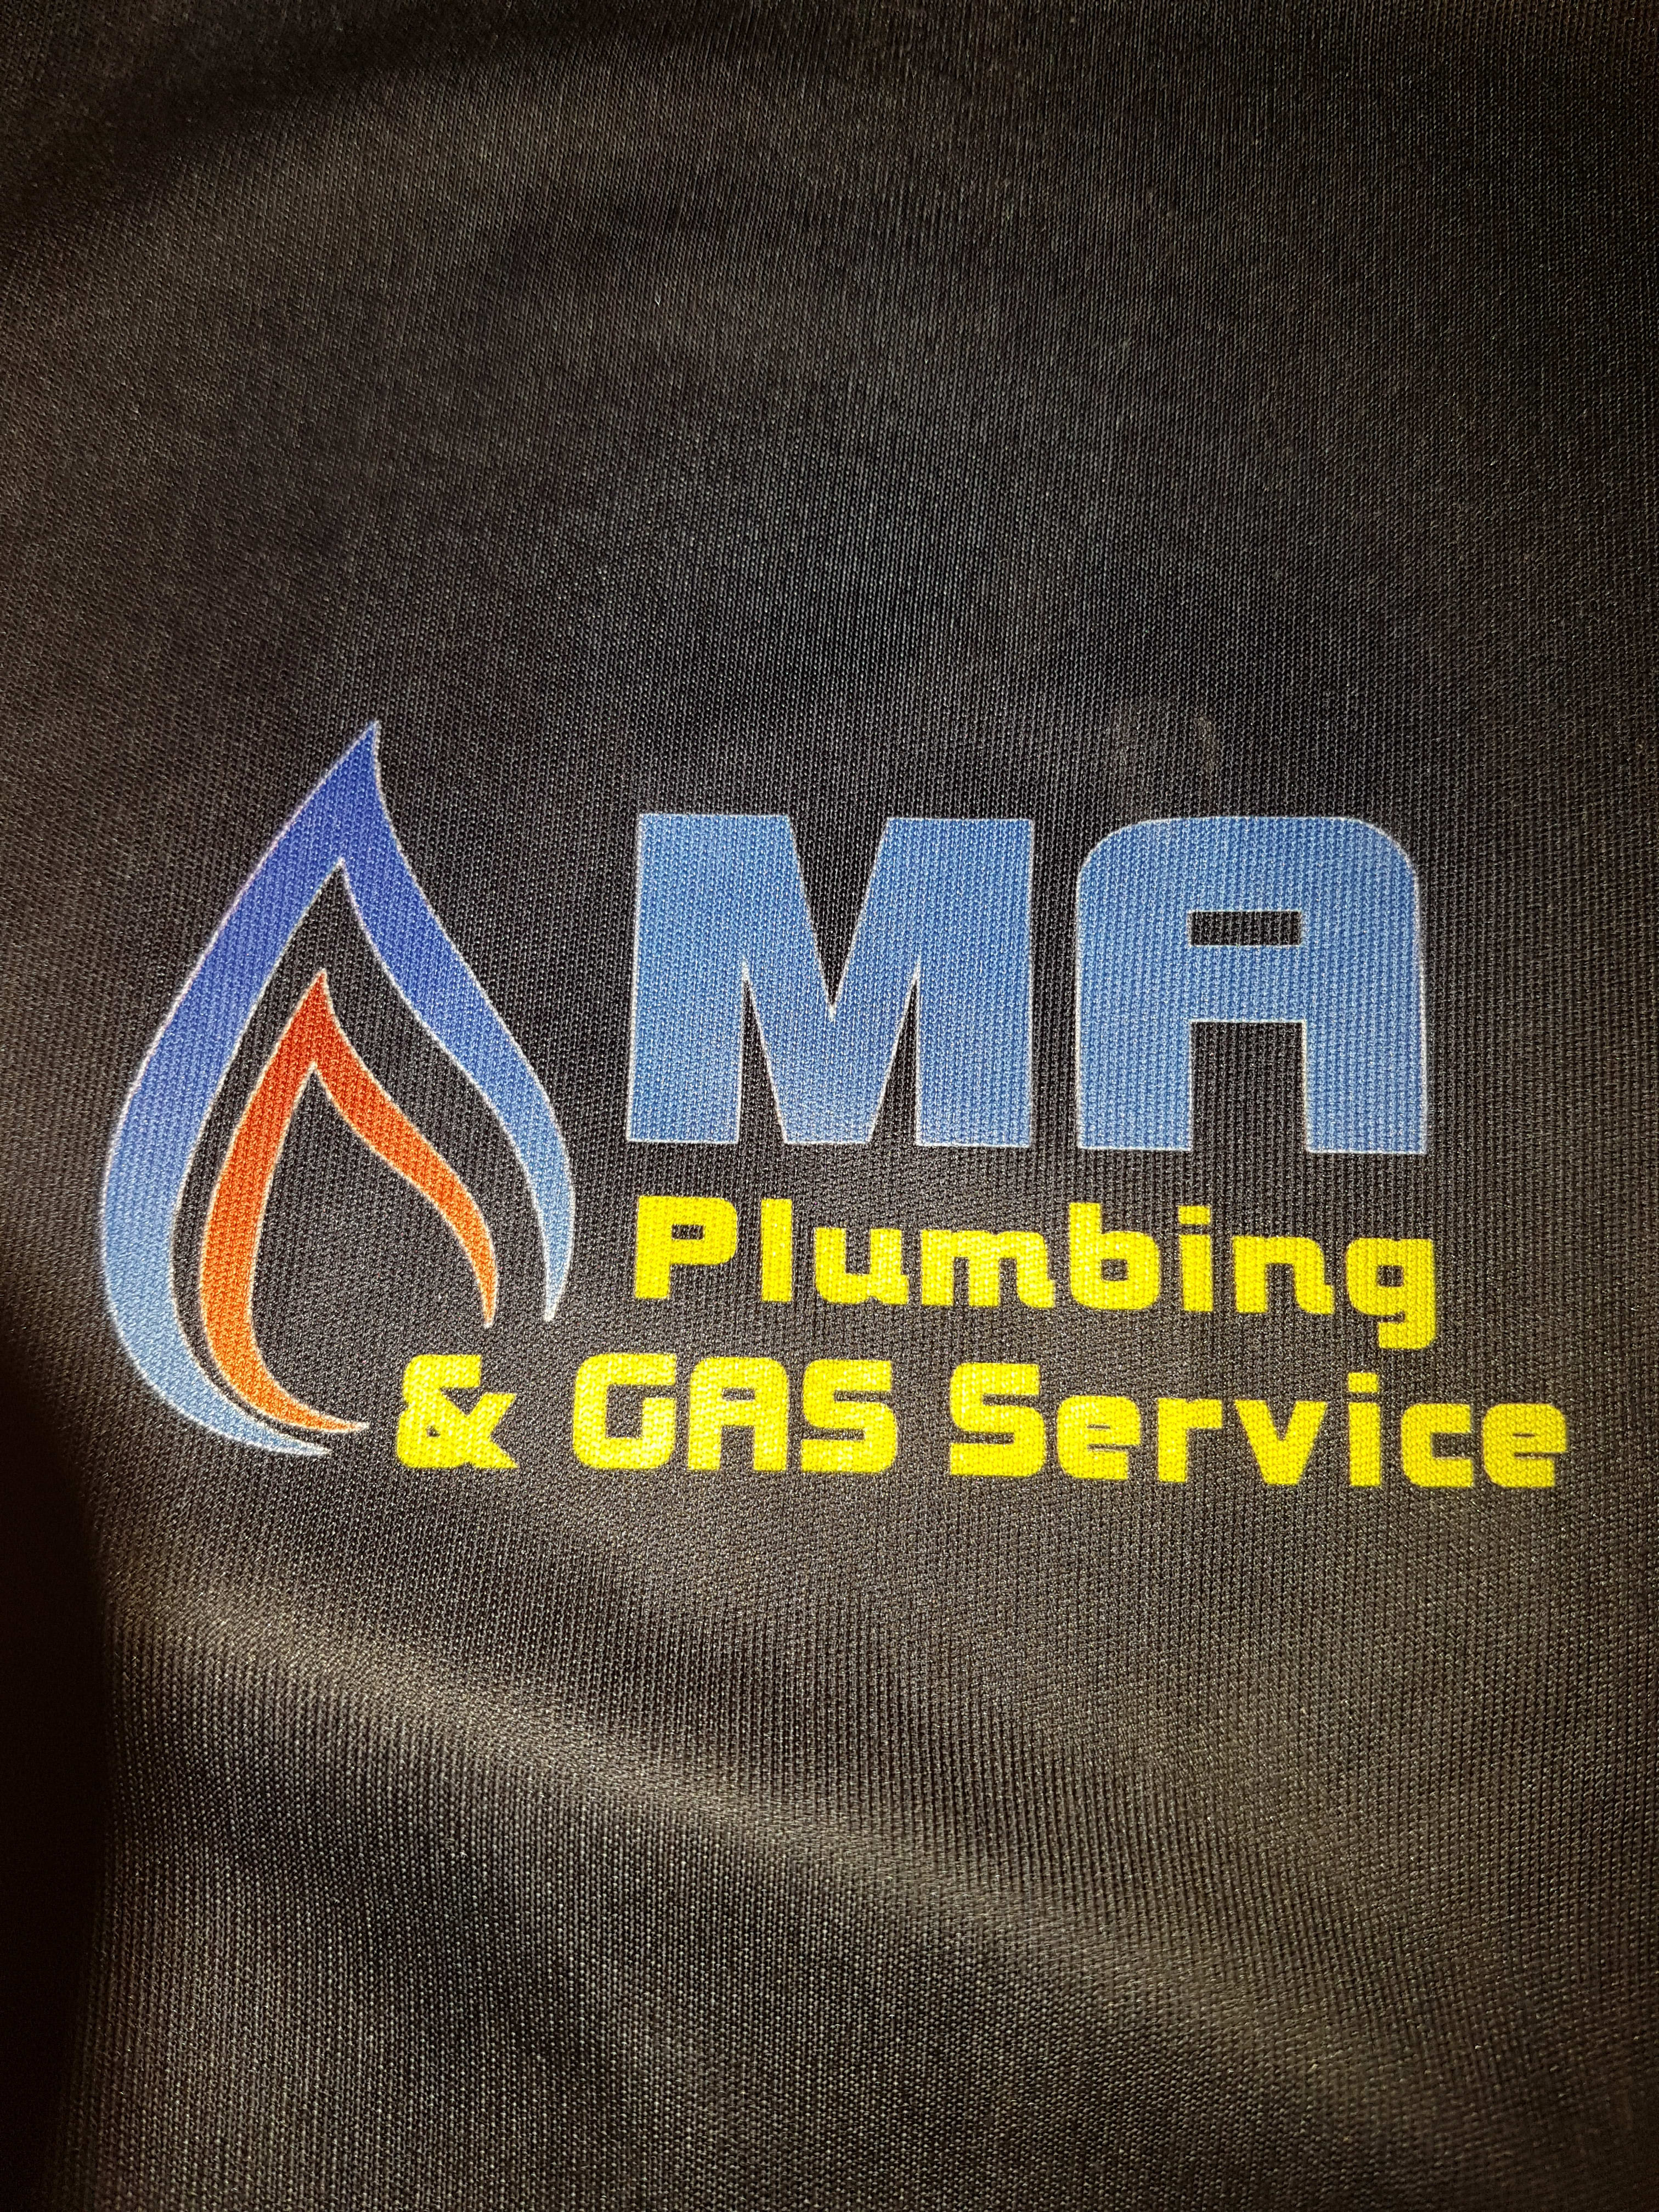 M A PLUMBING AND GAS SERVICES